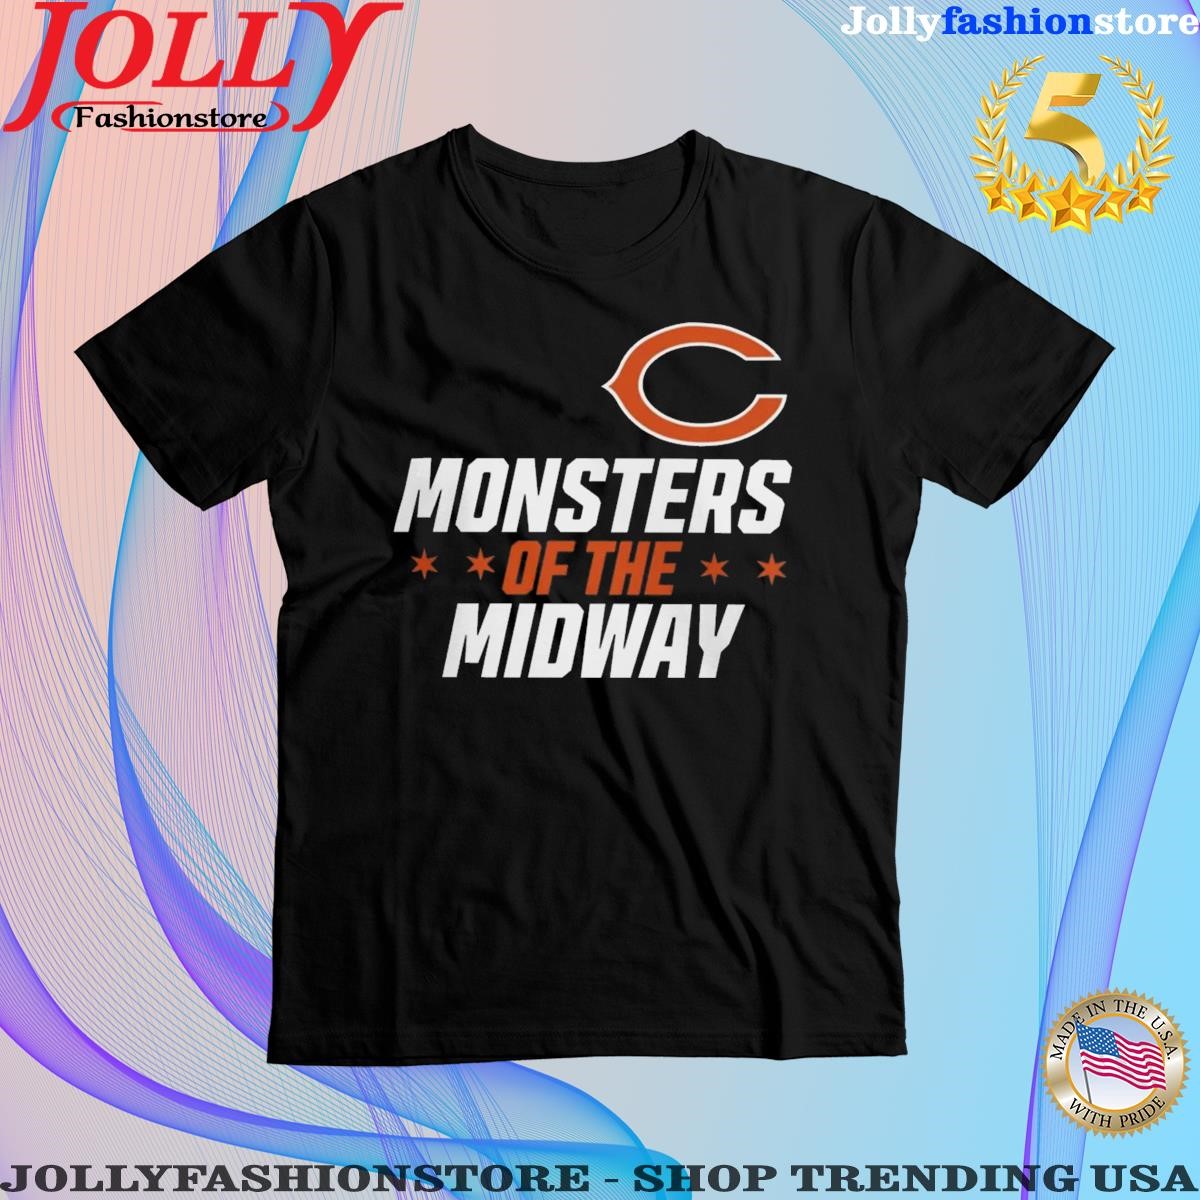 Trending chicago Bears Monsters Of The Midway T Shirt